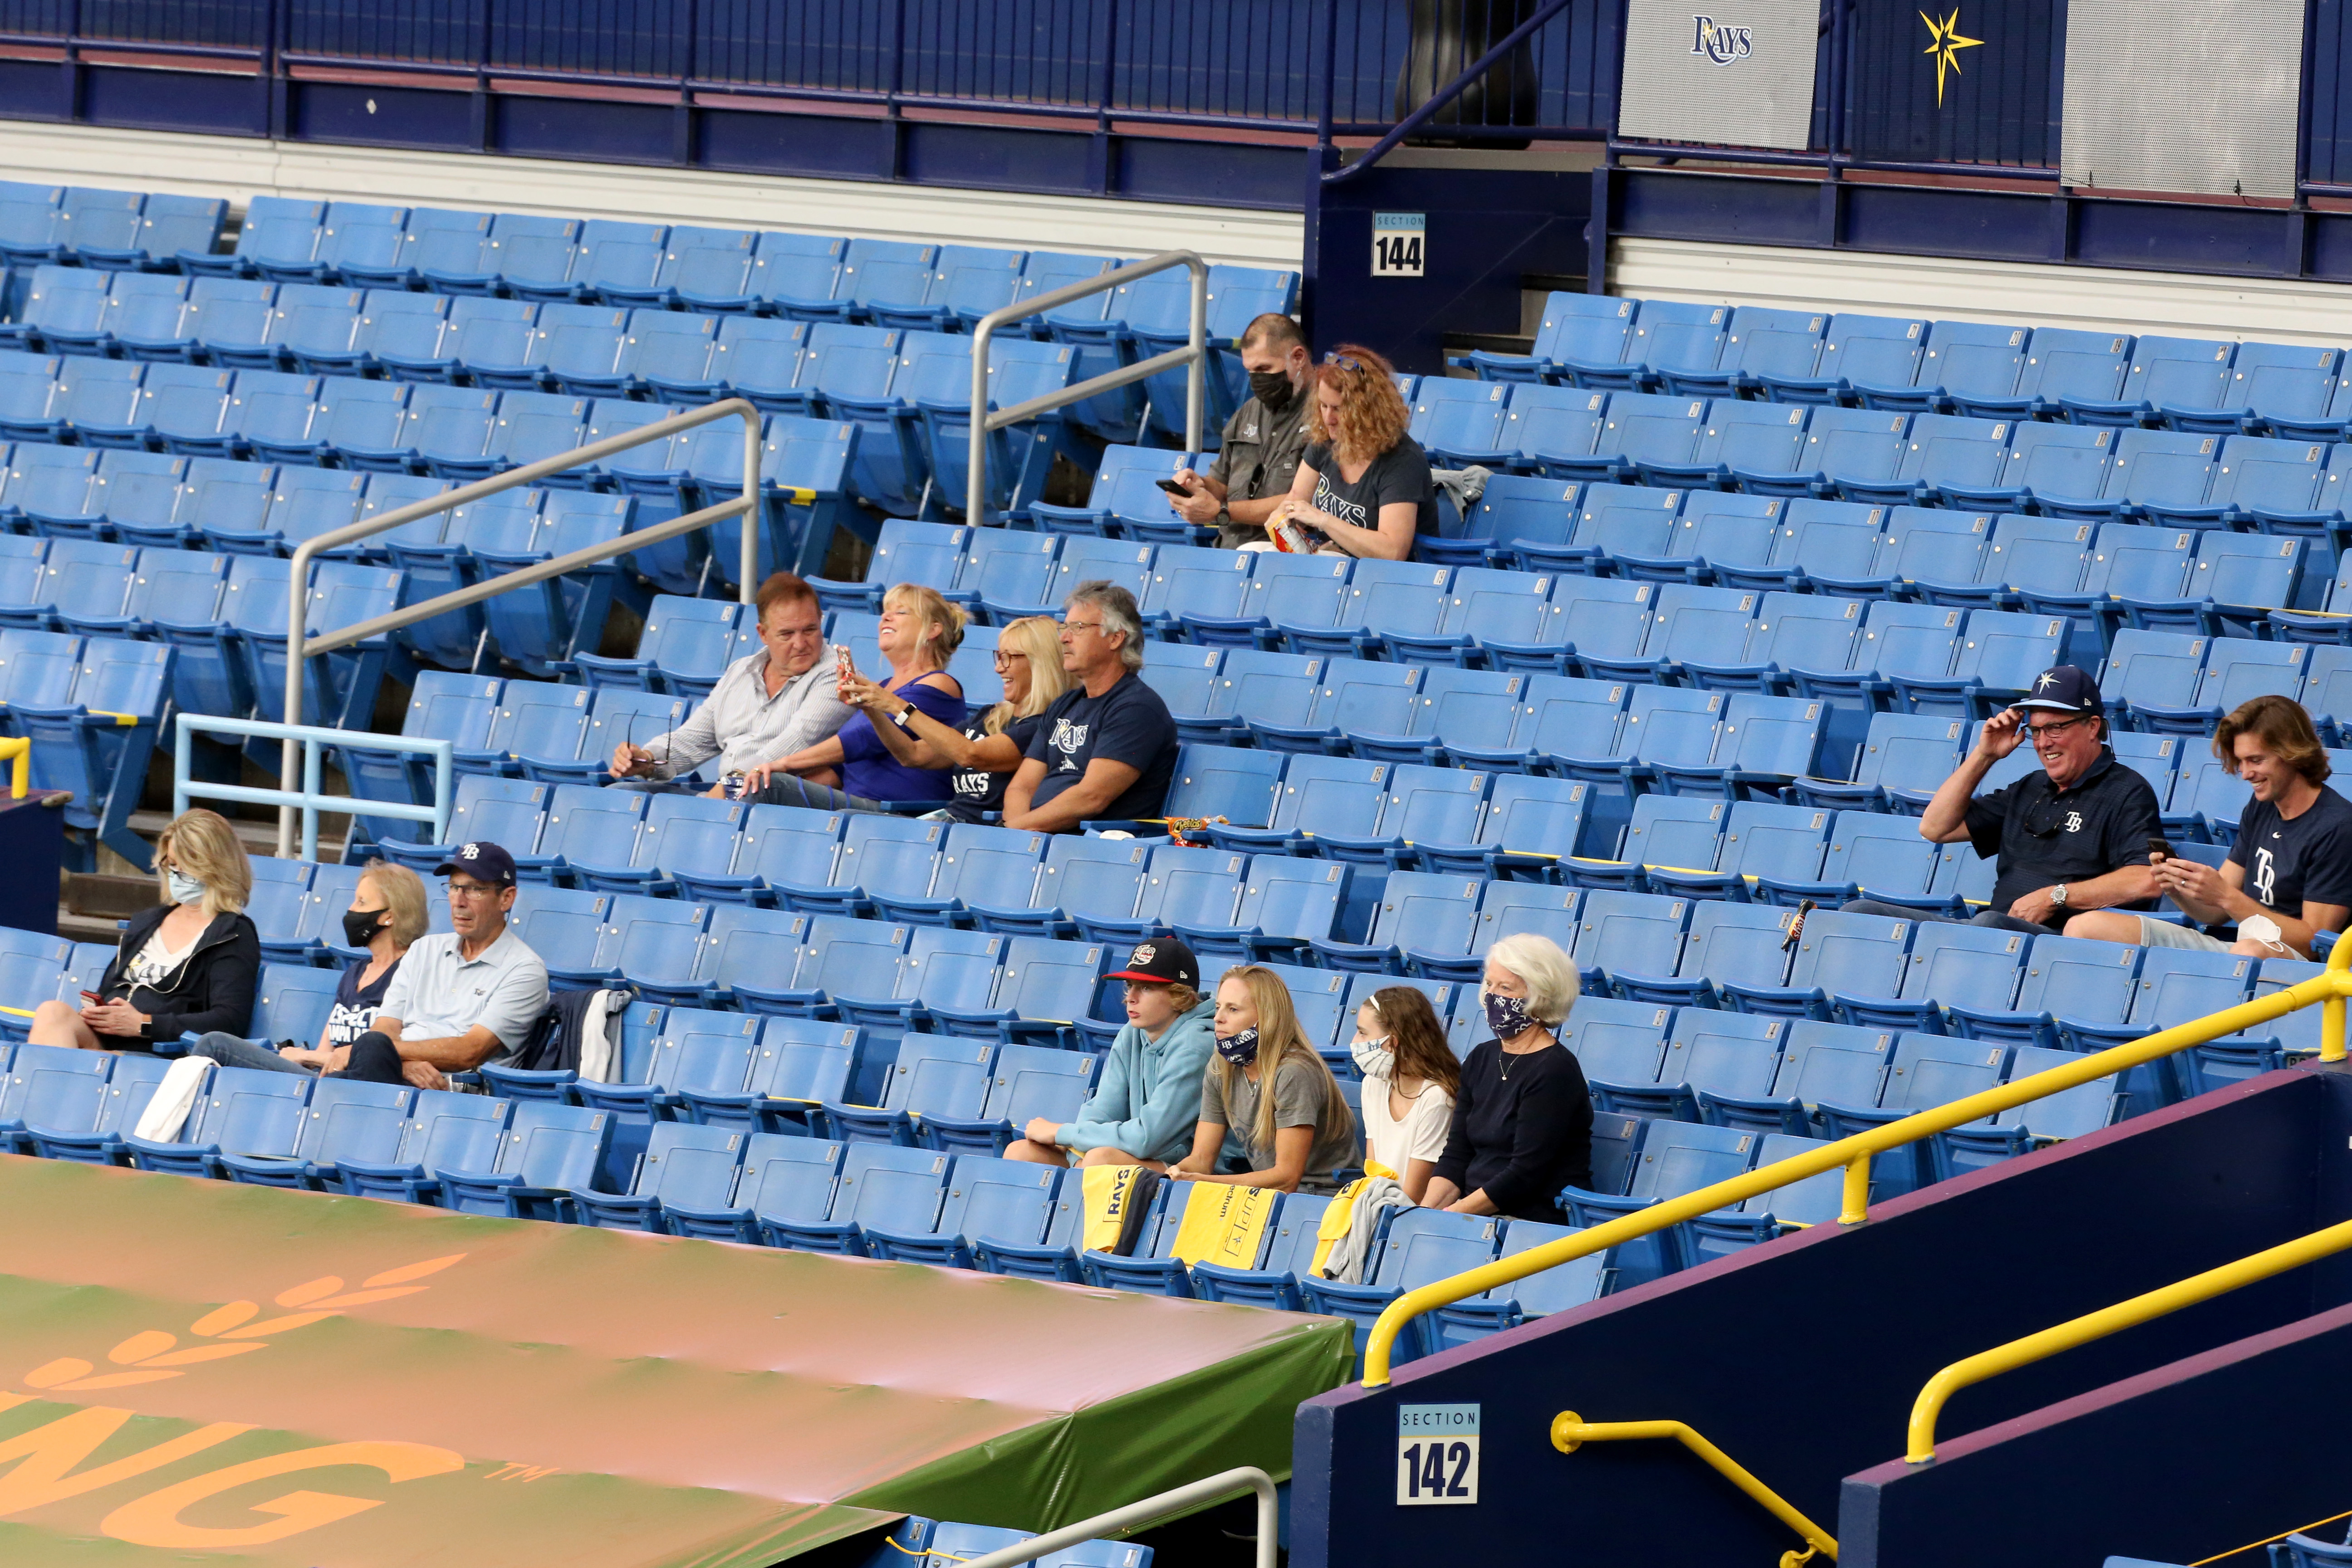 Section 112 at Tropicana Field 